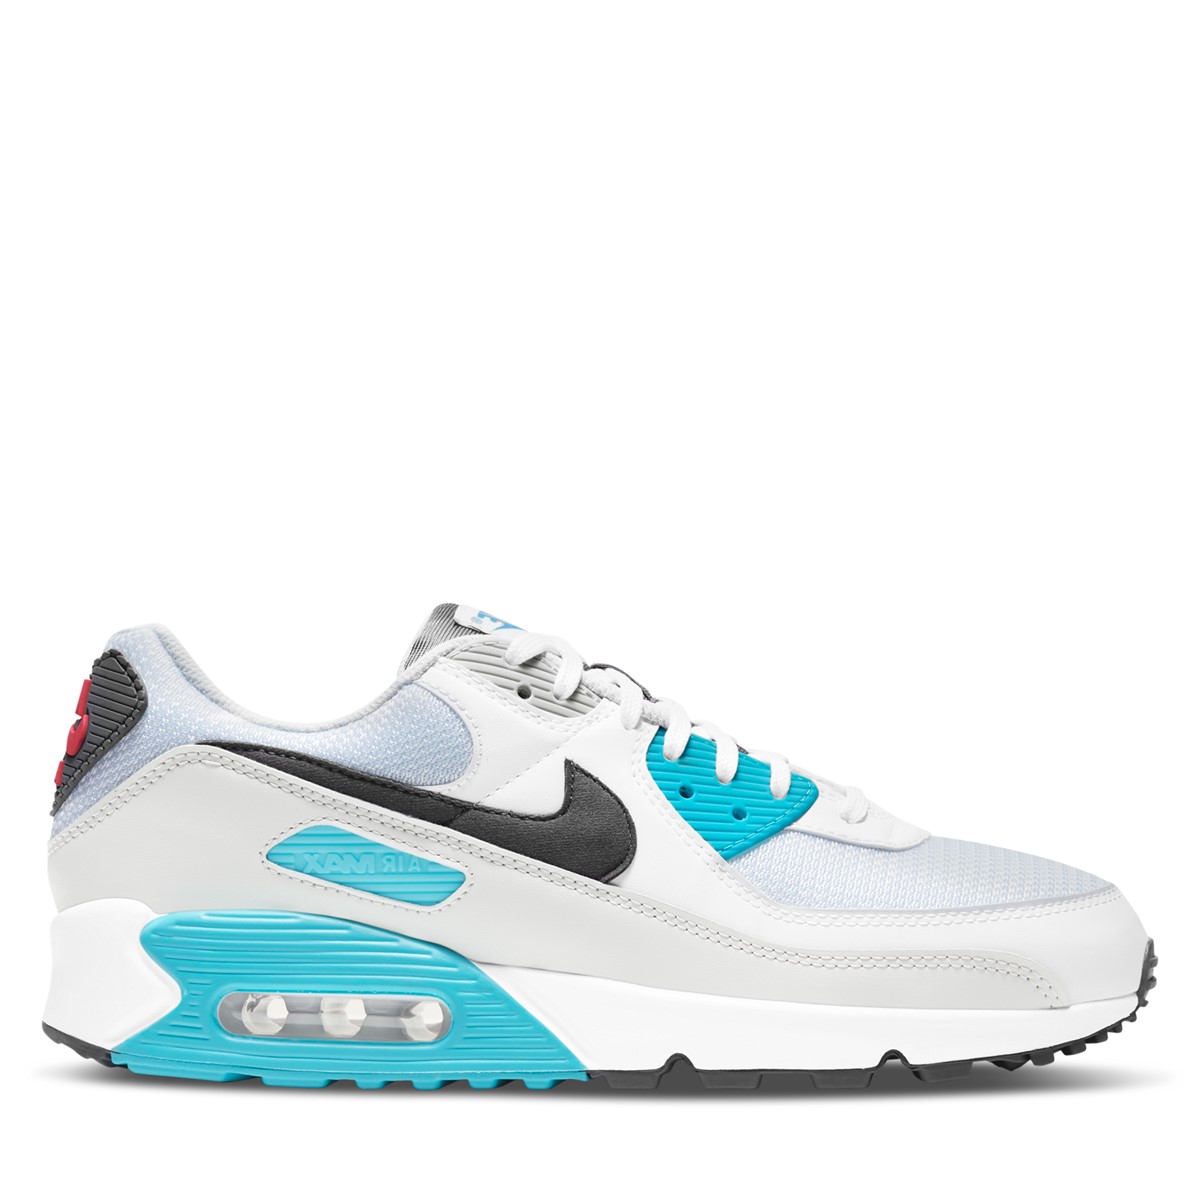 Men's Air Max 90 Sneakers in White/Blue/Red